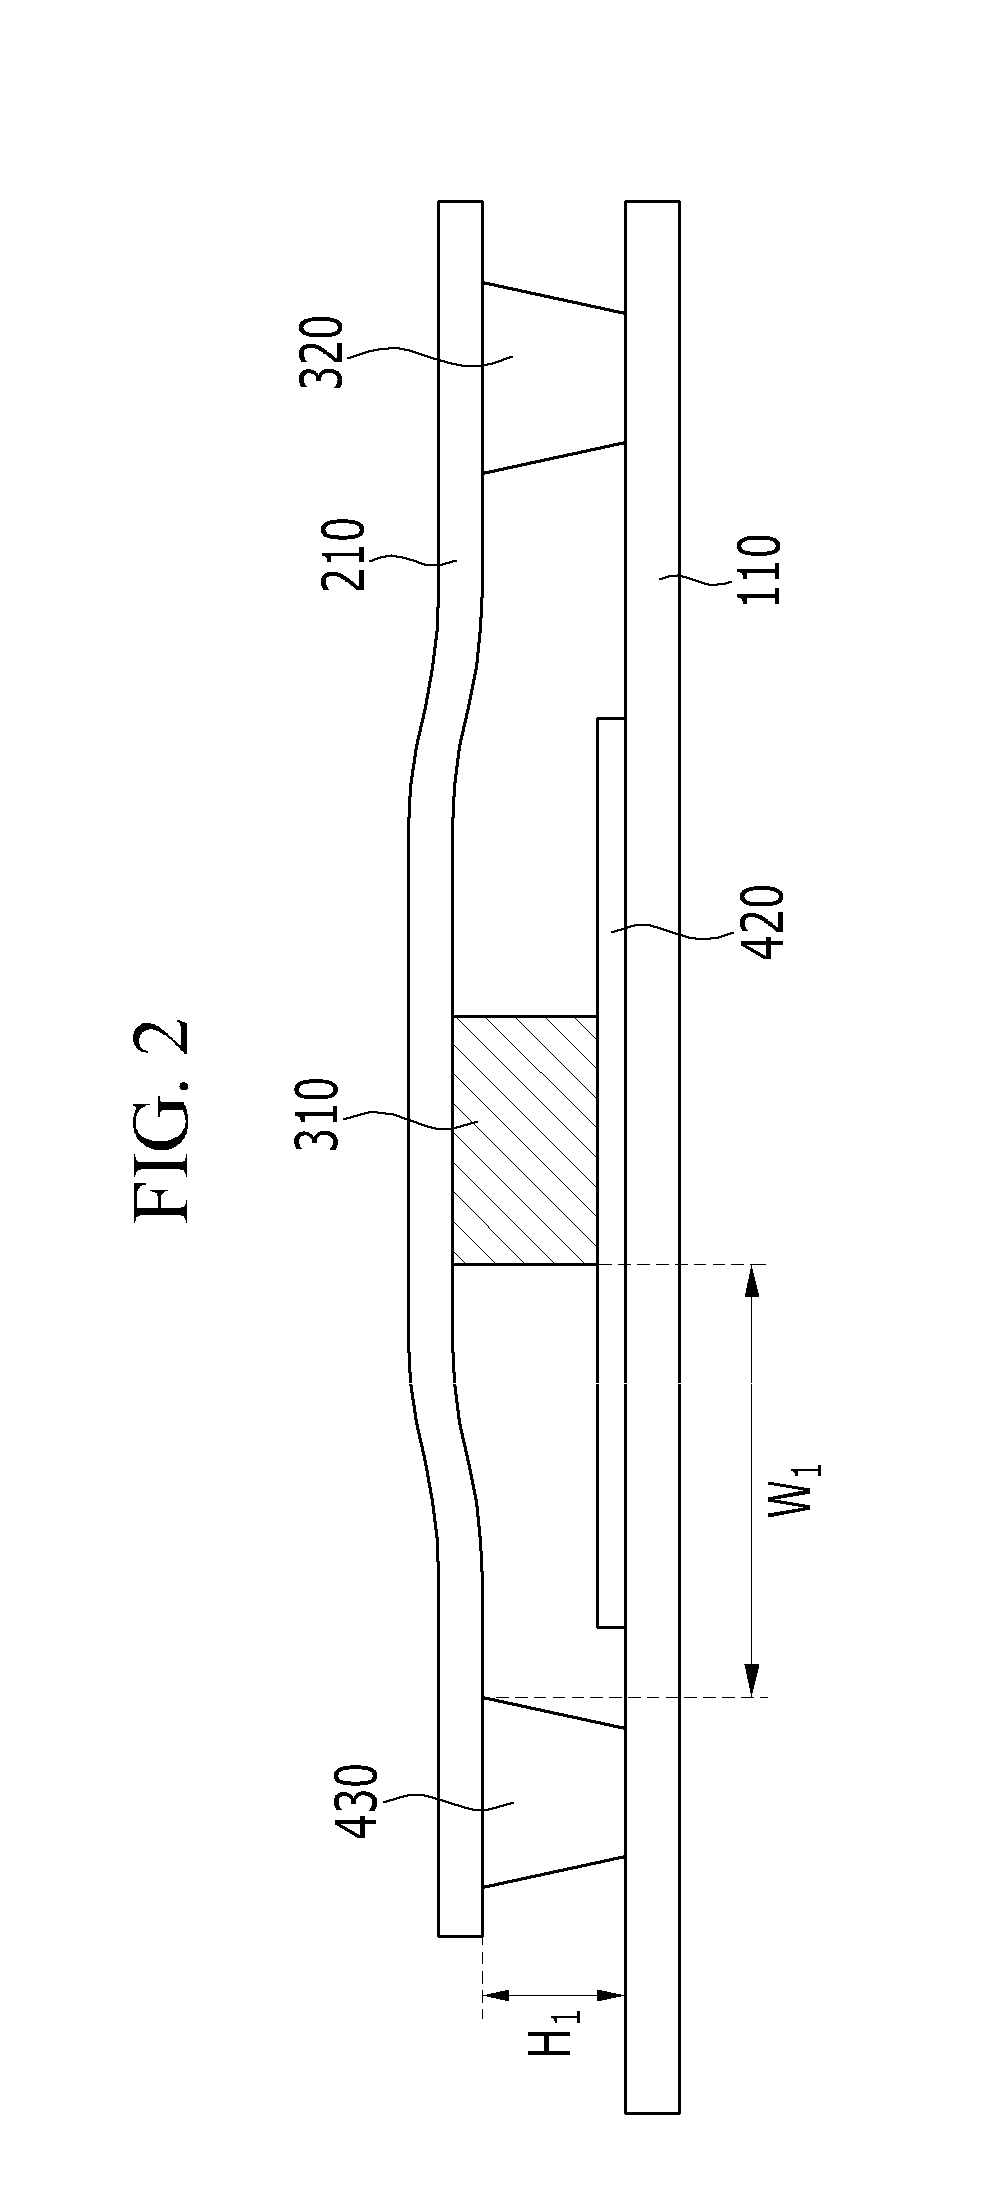 Liquid crystal display and method of manufacturing the same